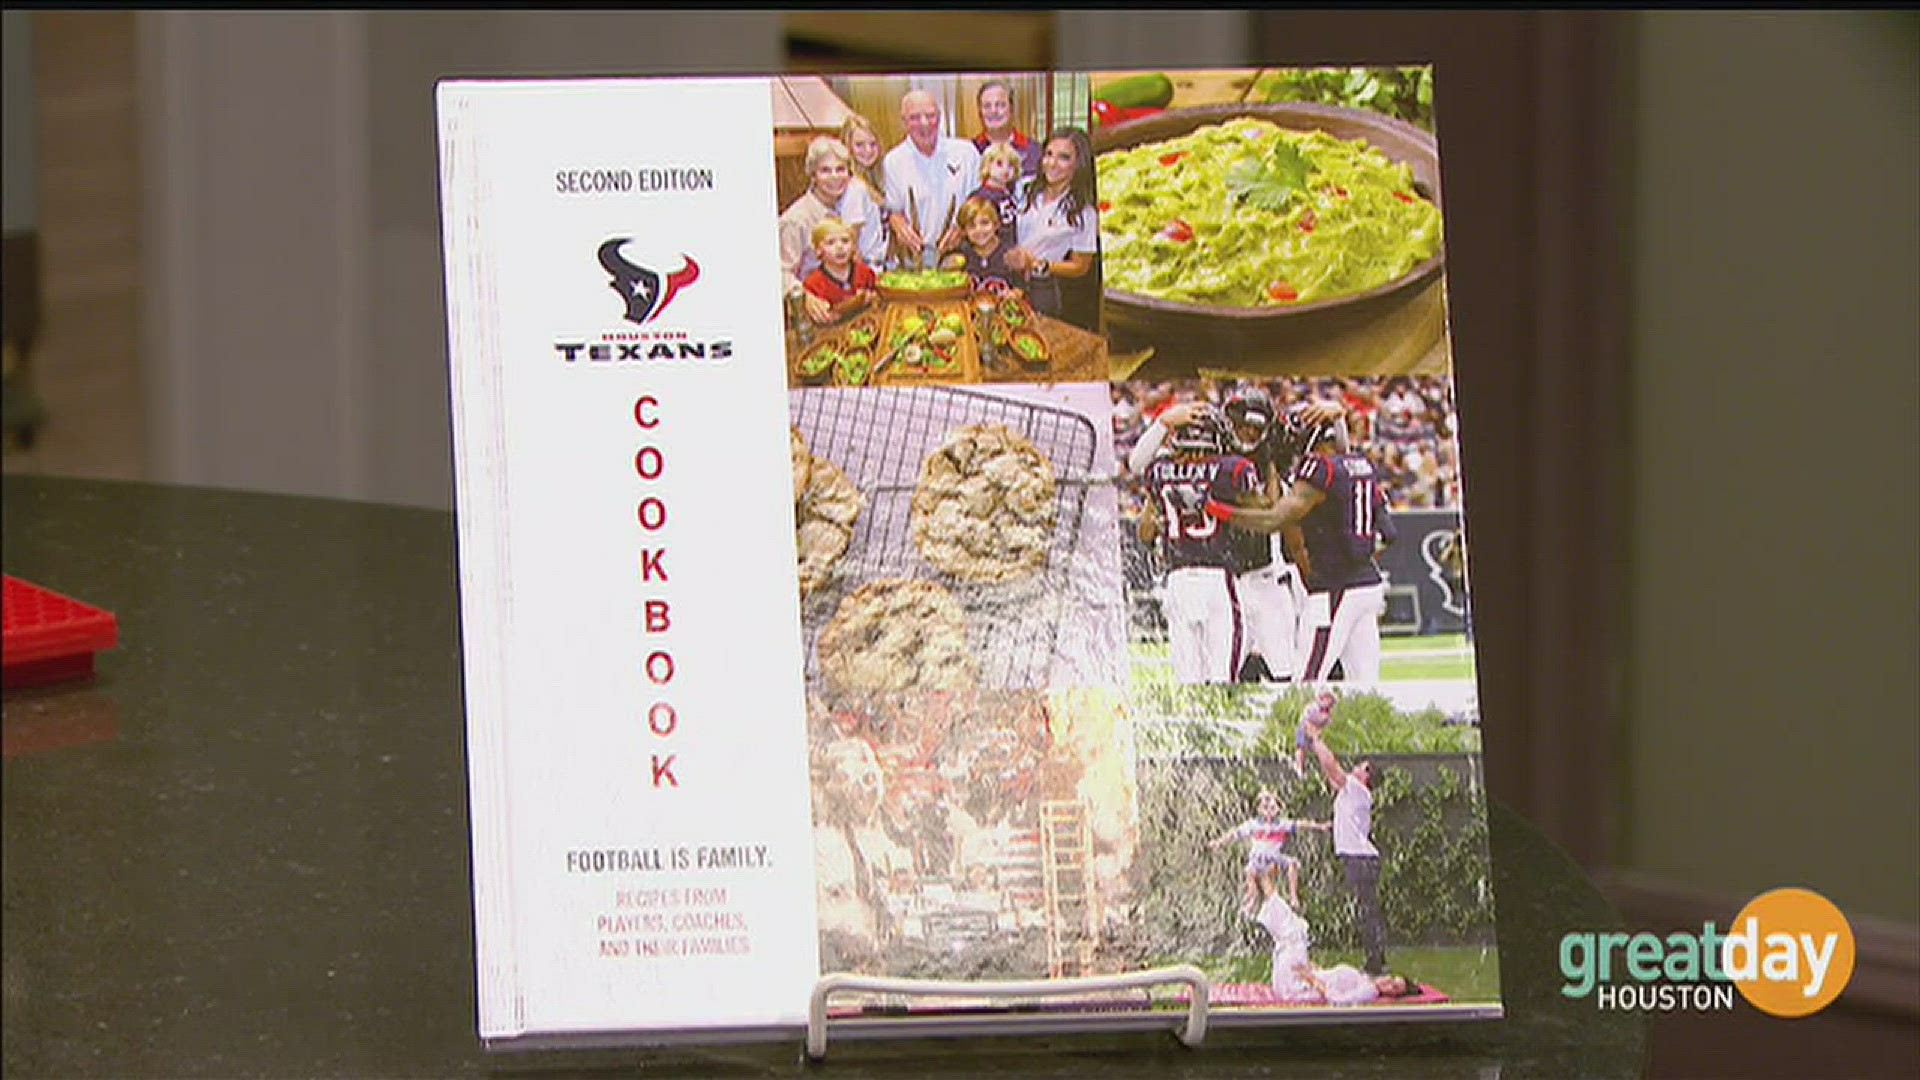 Hannah McNair & Marissa Allen share favorite family recipes of the Houston Texans players, coaches and staff from the 2016 Texans Cookbook.